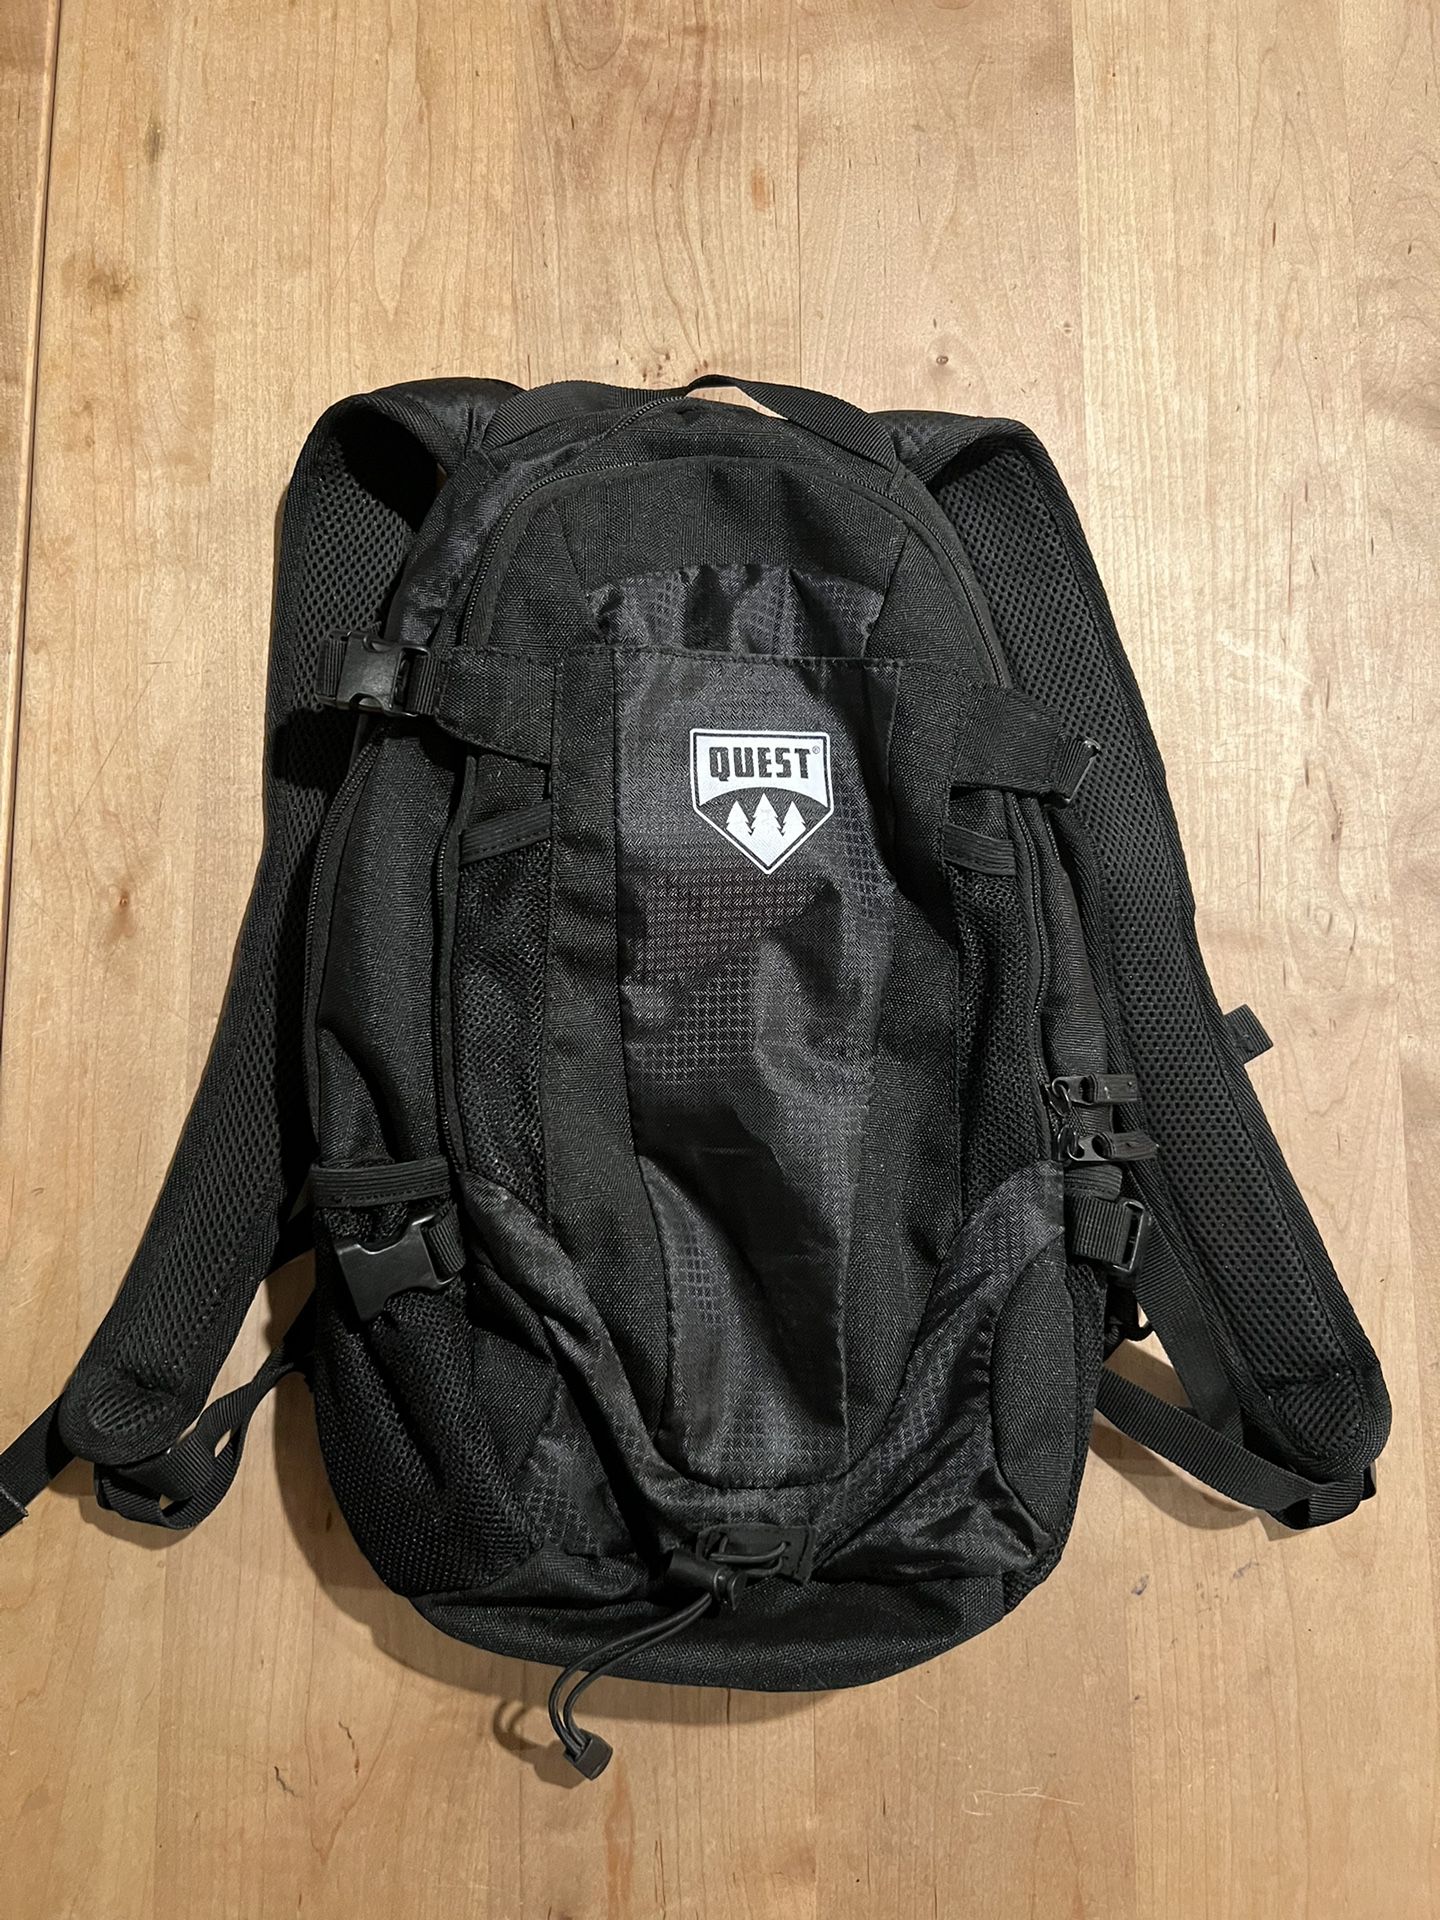 Quest Hydration Pack Like New Condition!!